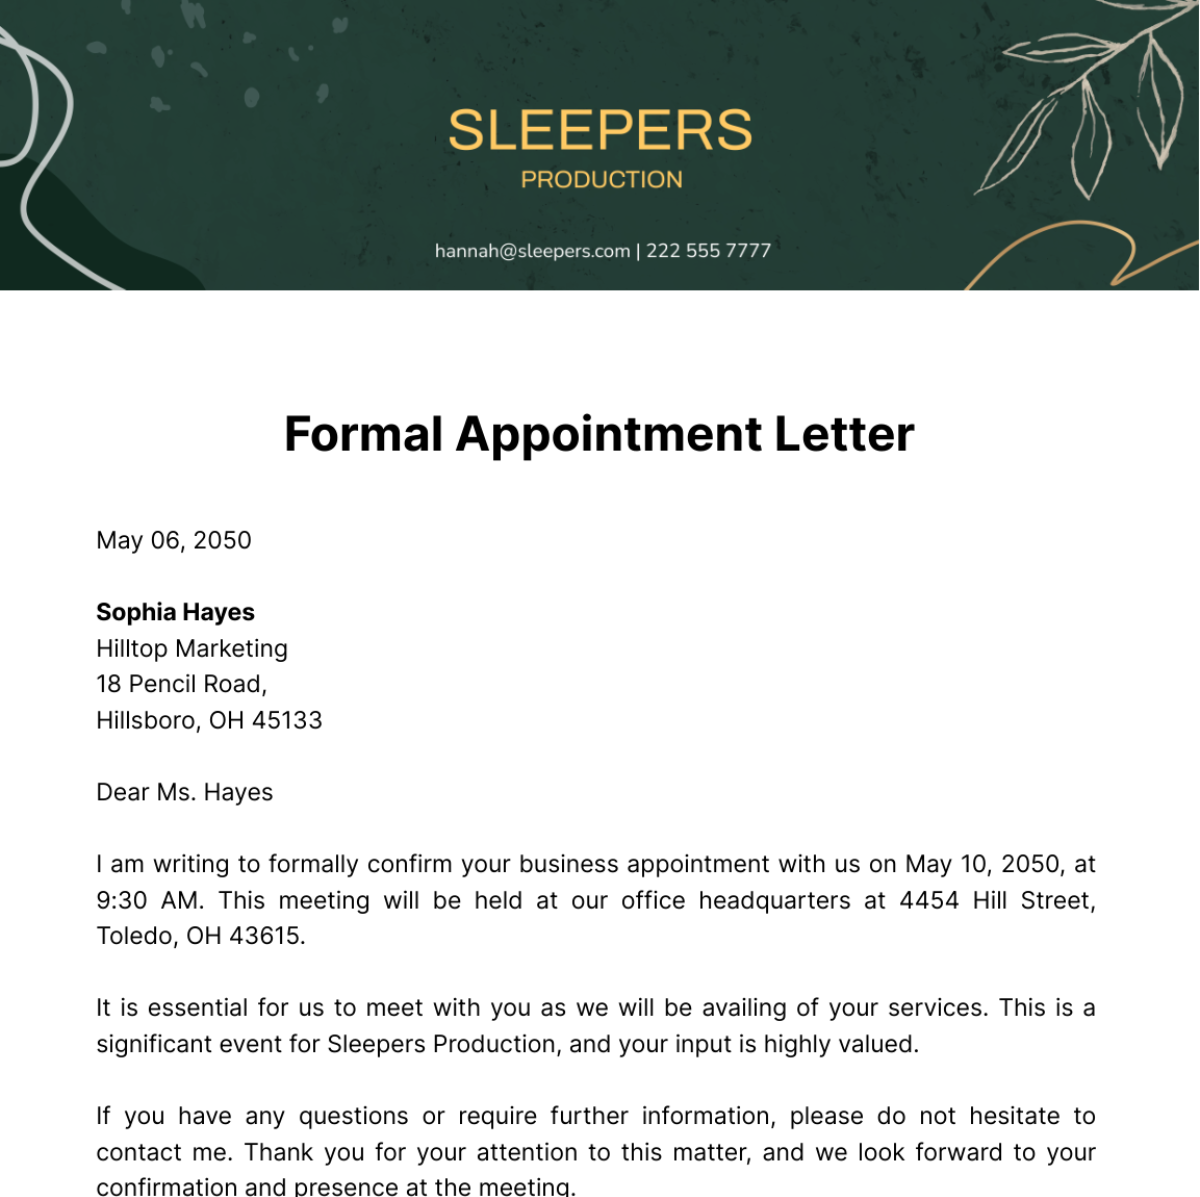 Formal Appointment Letter   Template